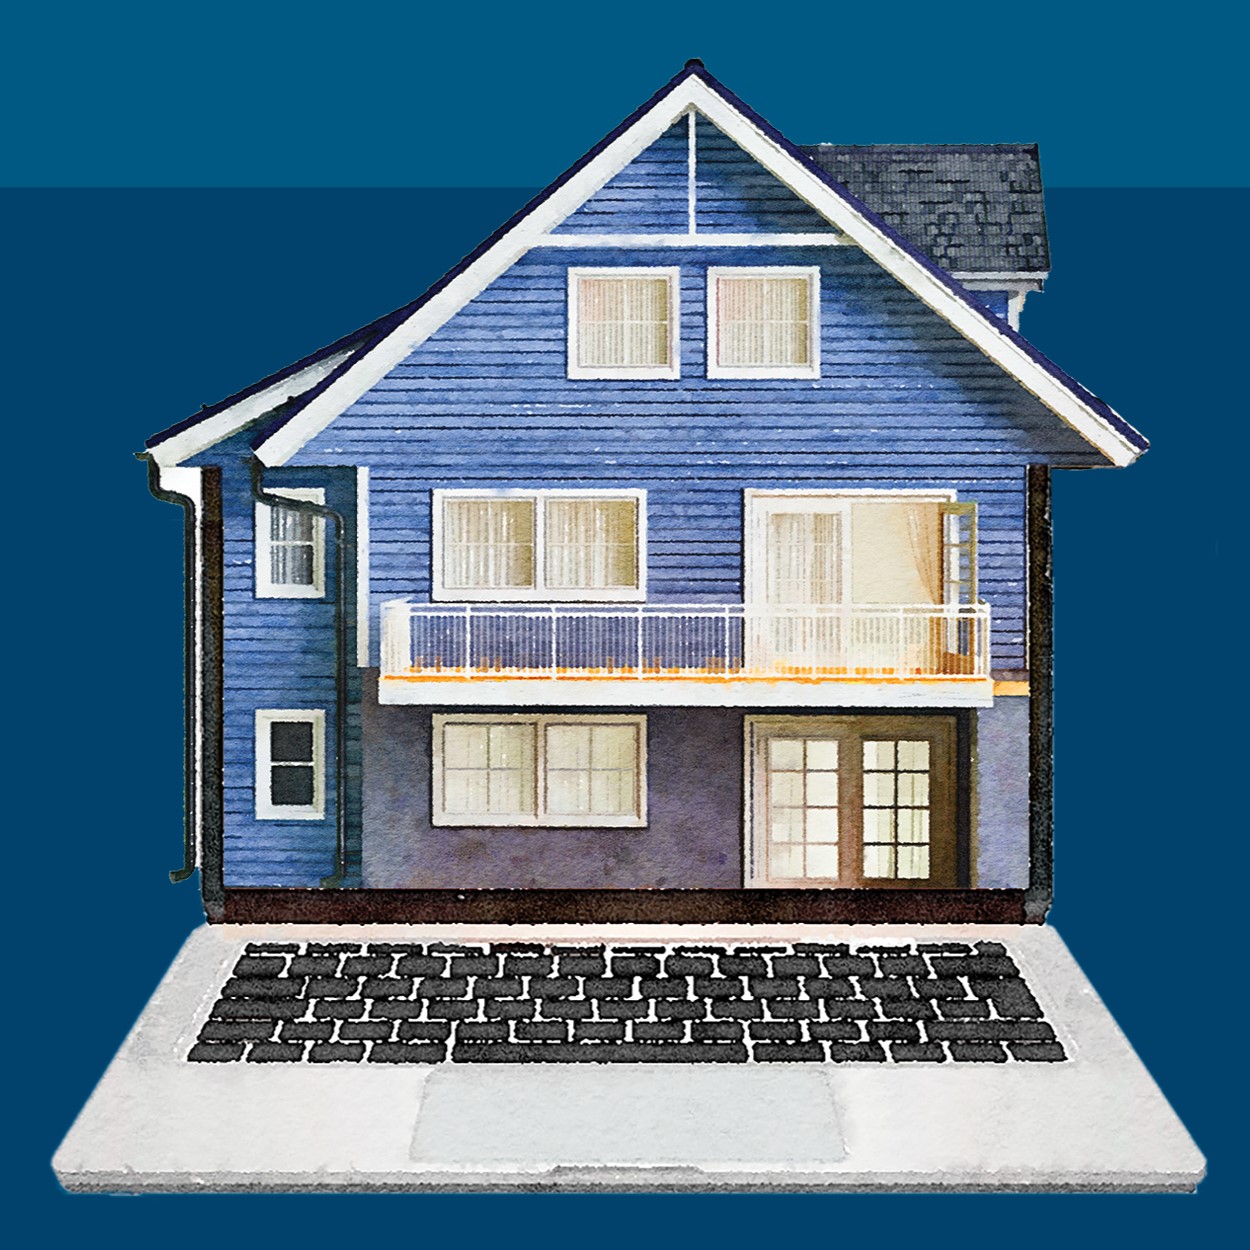 House rendered as a laptop.